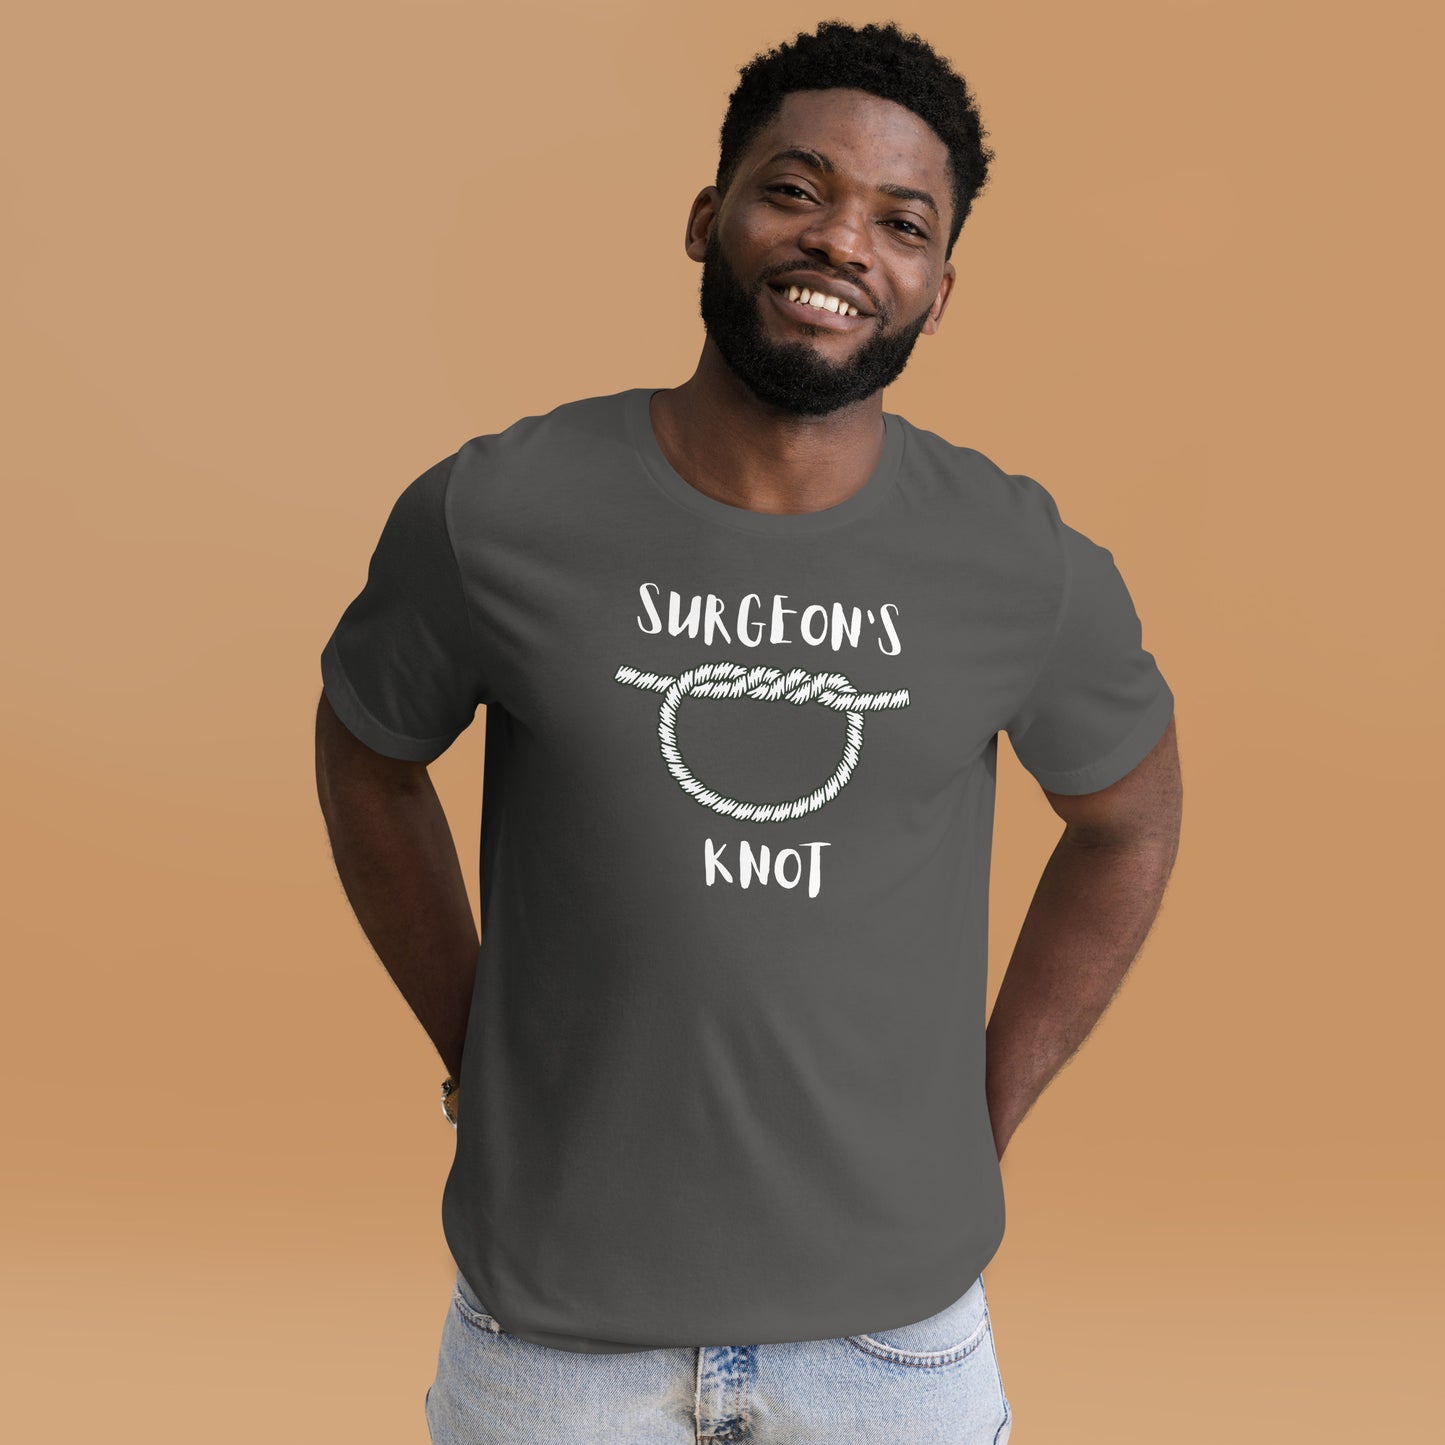 Graphic Tee, Surgeon's Knot, Surgeon, Surgery, Ortho, OB/Gyn, Funny Doctor Shirt, Medical Student, Funny Nurse Shirt, Funny Resident Shirt, Doctor, Physician, Resident, Nurse, PA, NP, Medical Student